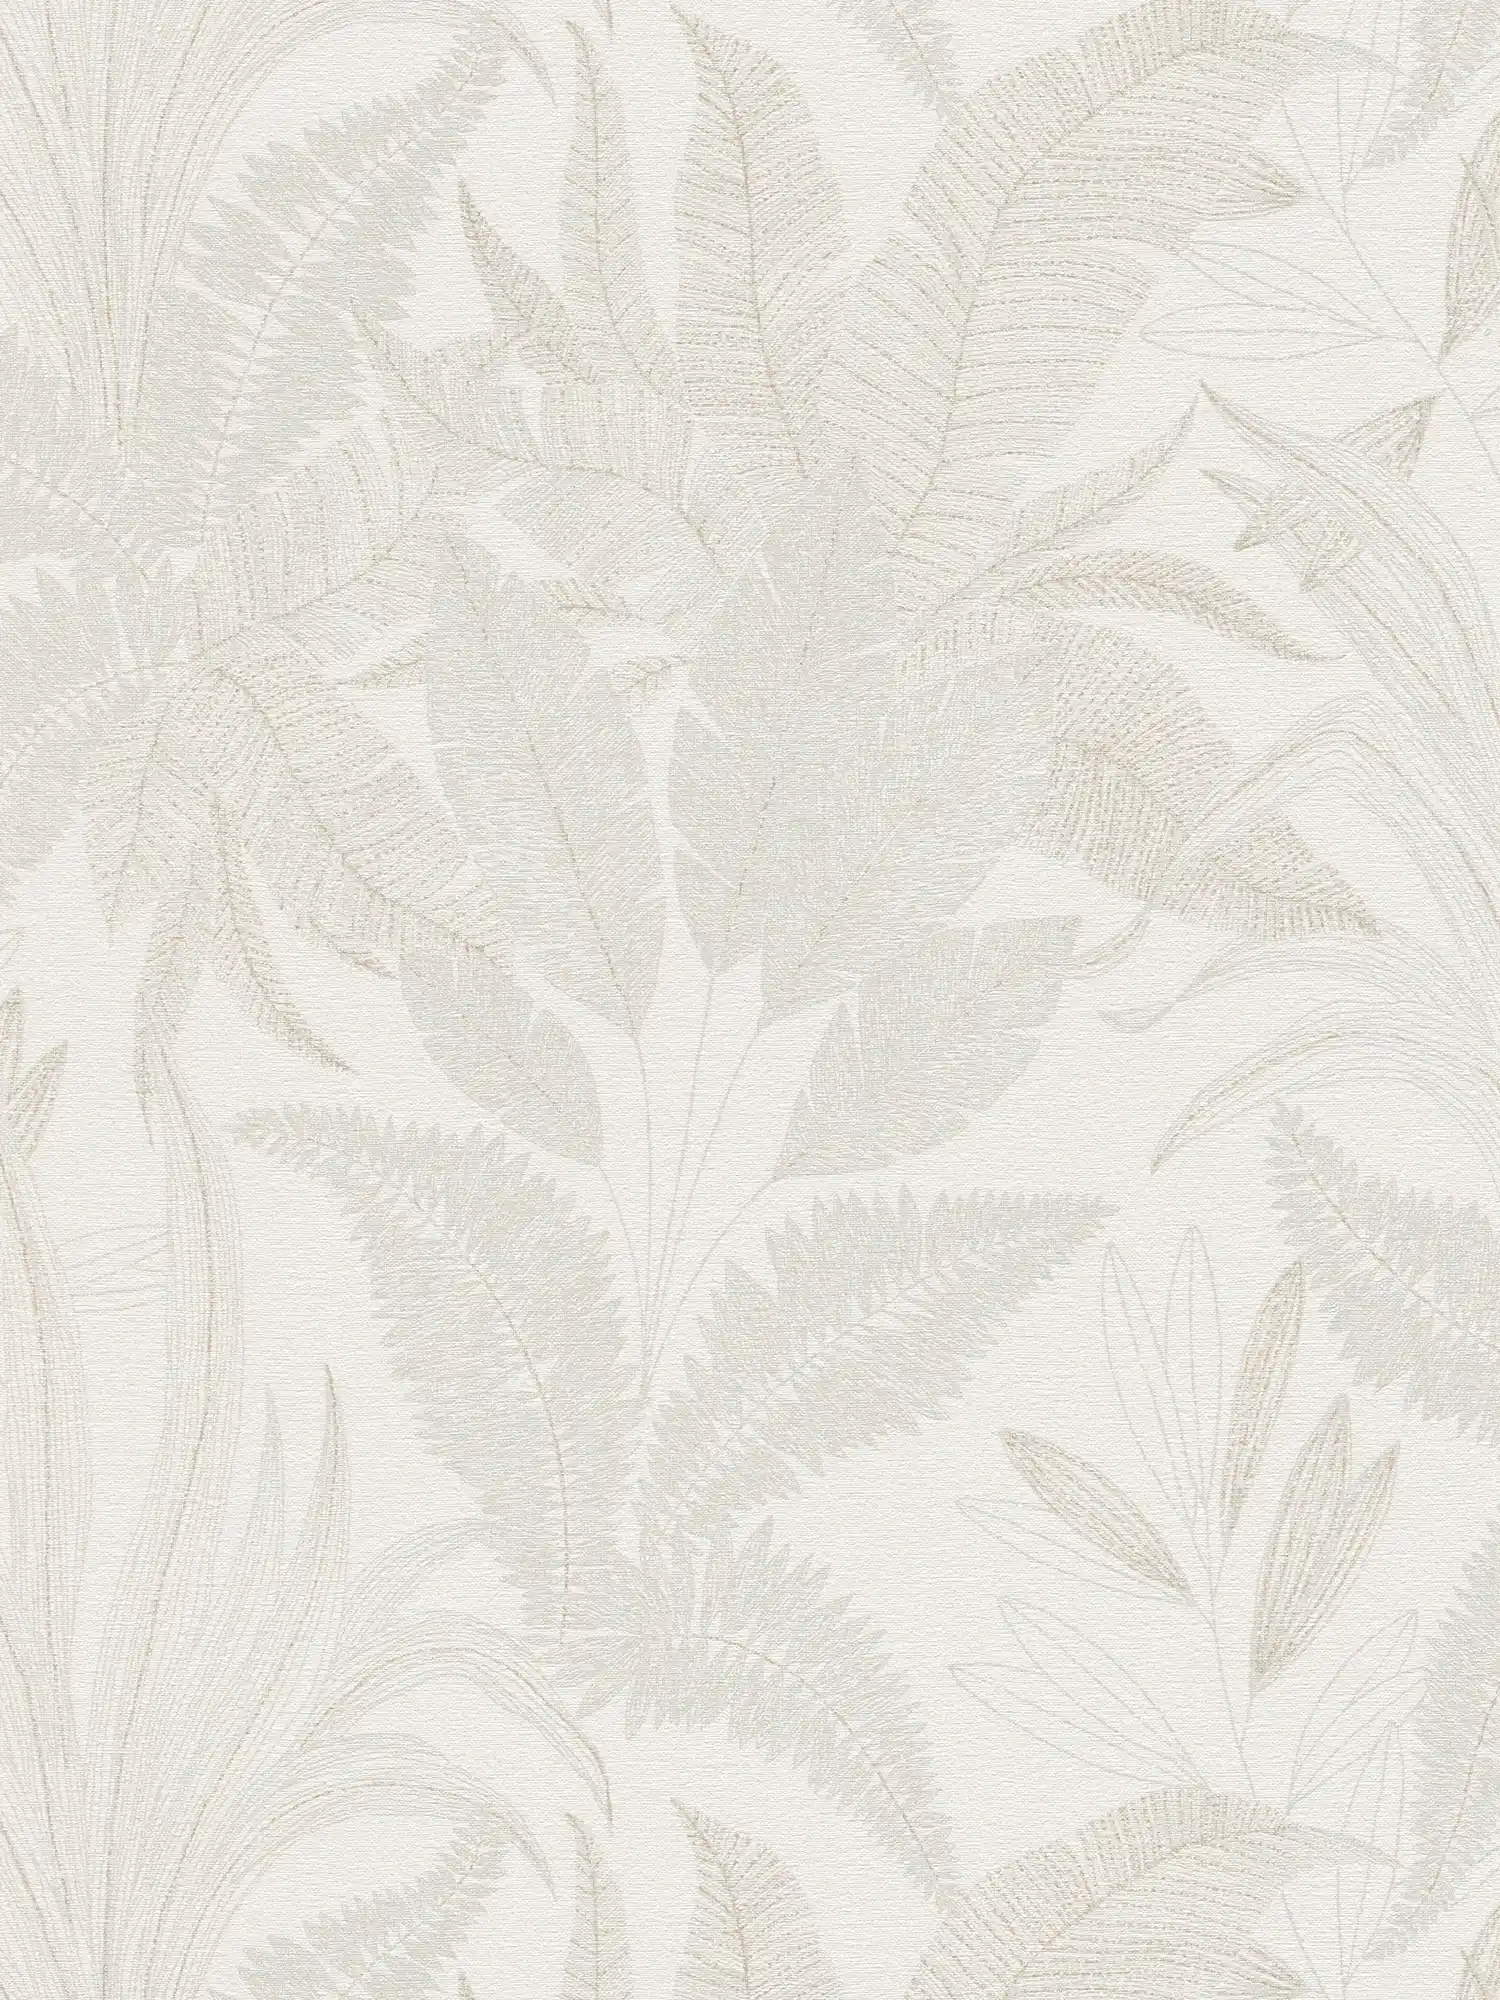 Floral non-woven wallpaper with leaf pattern in soft colours - cream, beige
